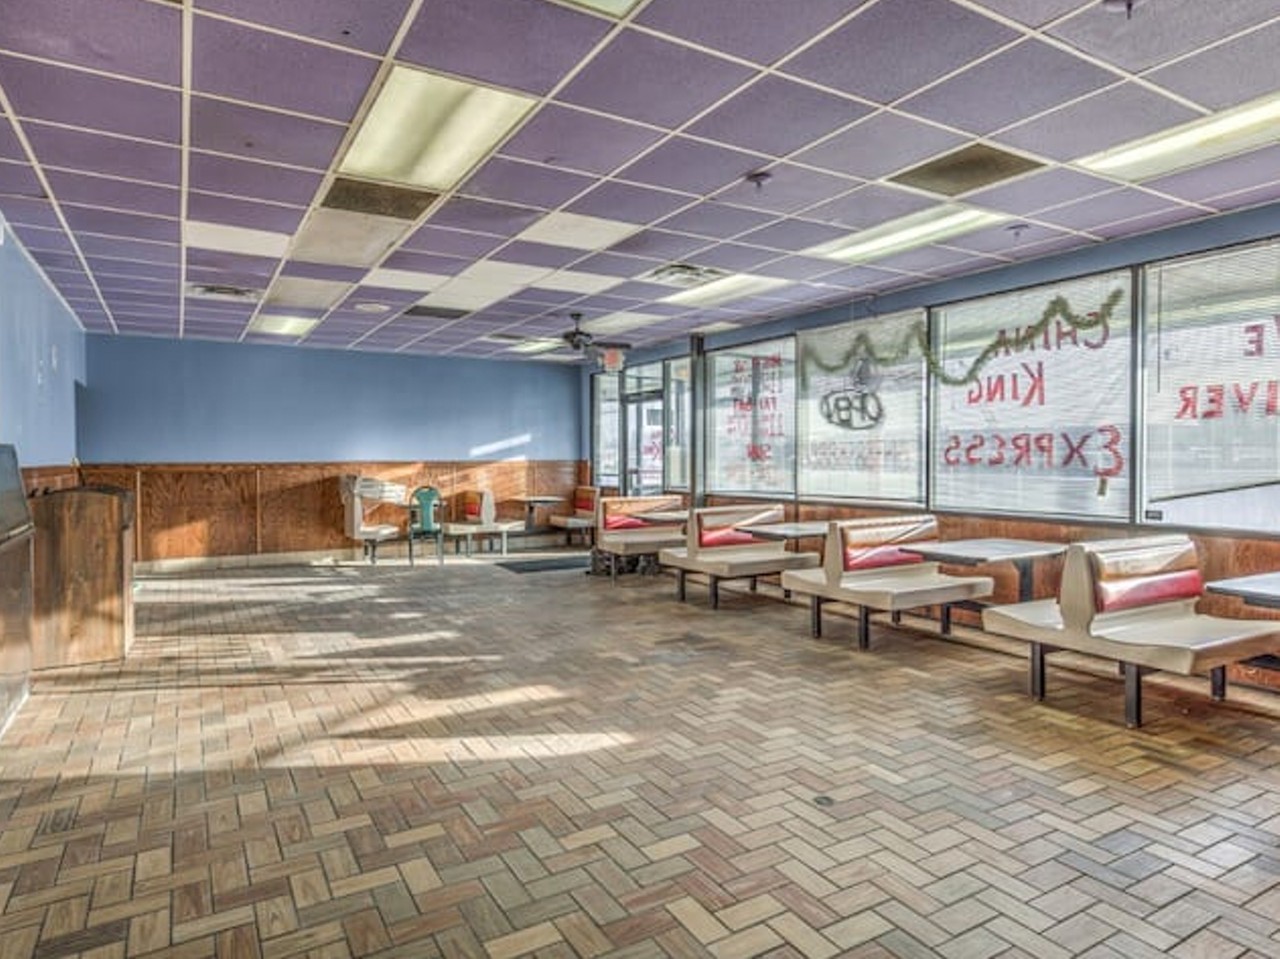 You Can Rent an Entire Popeye&#146;s Chicken in St. Louis on Airbnb [PHOTOS]